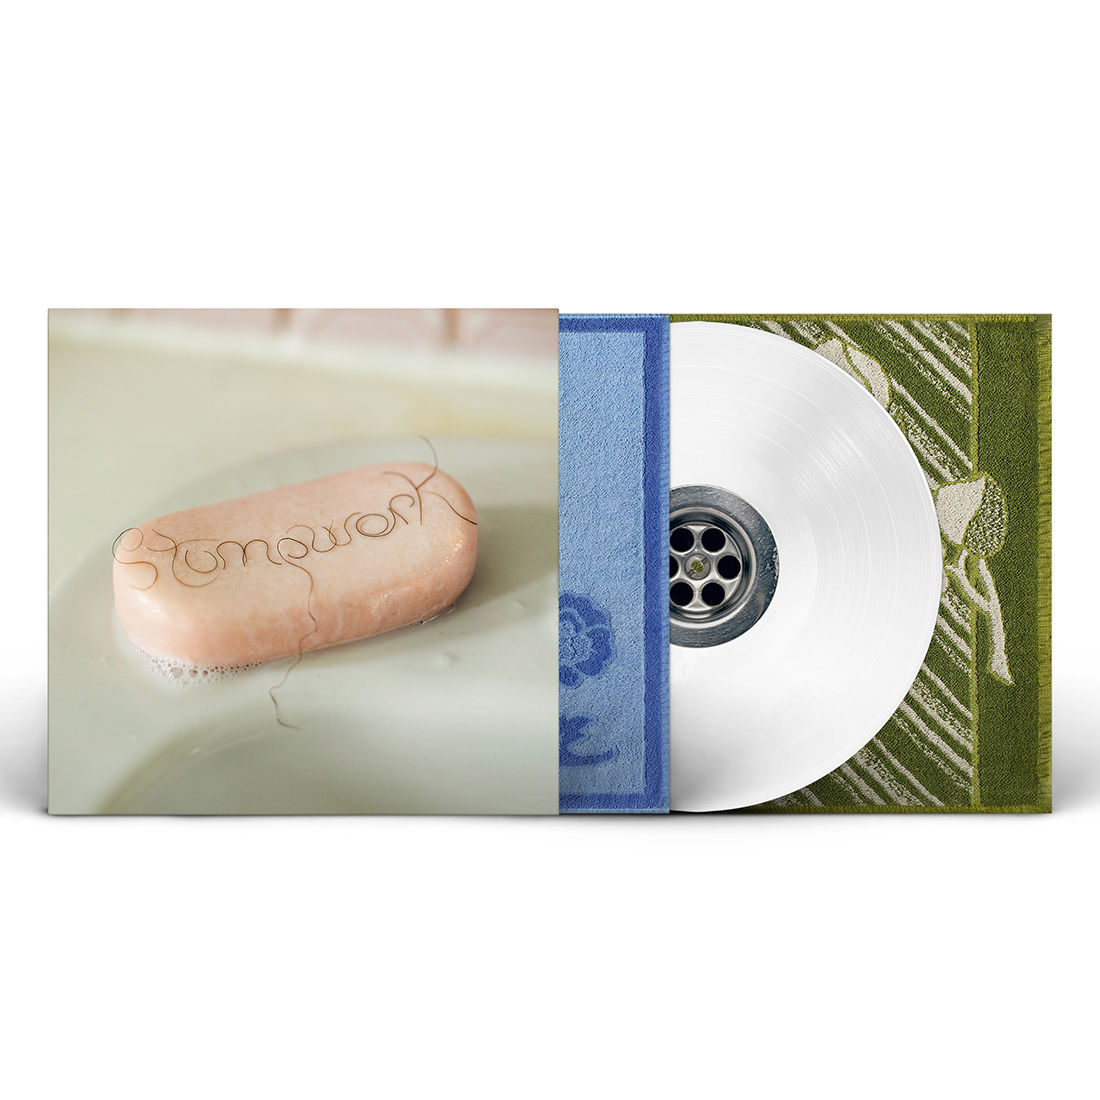 Dry Cleaning - Stumpwork: Limited White Vinyl LP